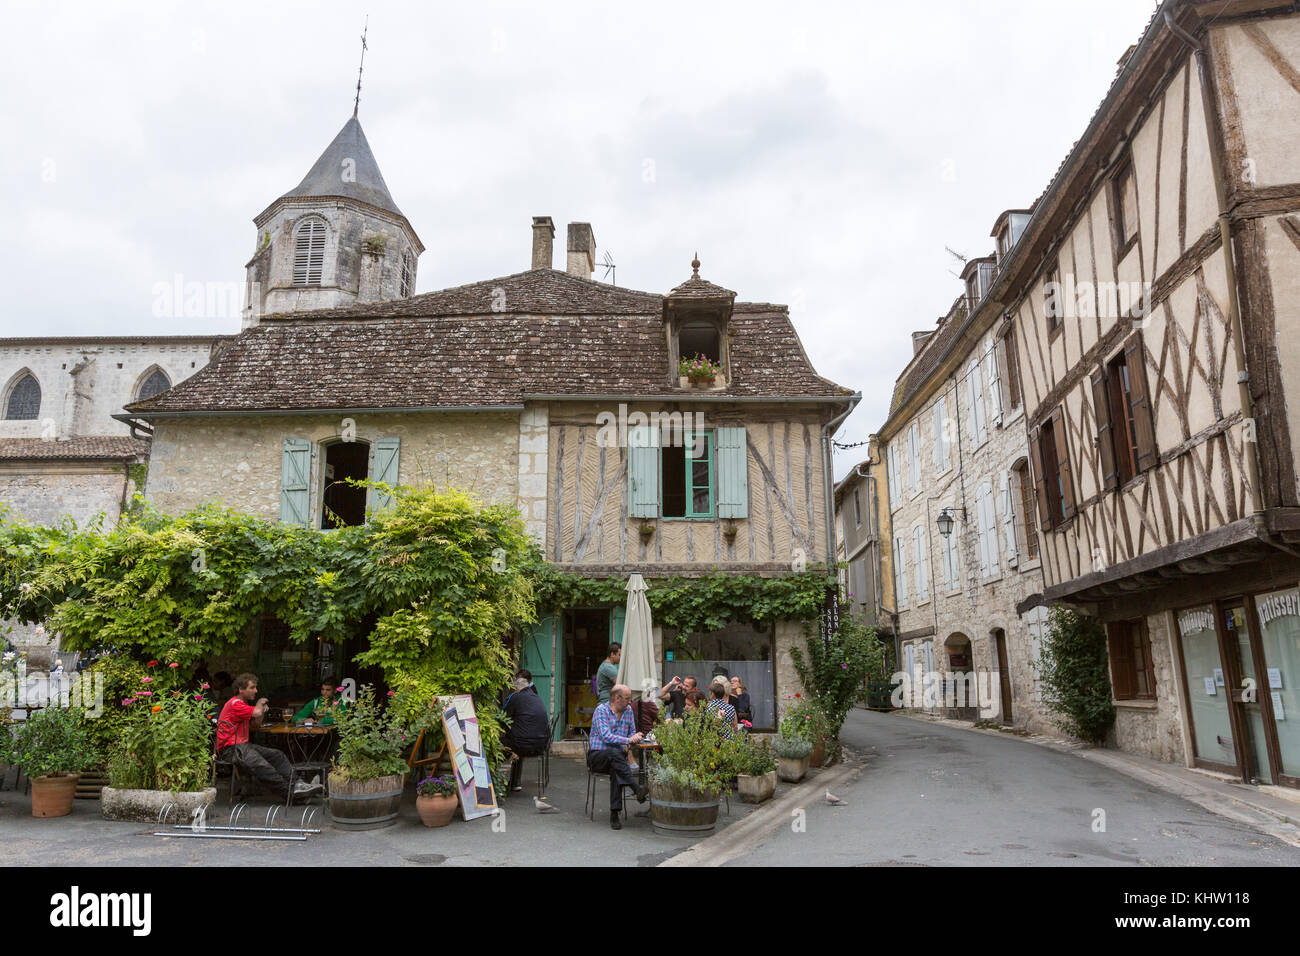 Issigeac, medieval village with timber framing houses  in Périgord, Nouvelle-Aquitaine, France Stock Photo